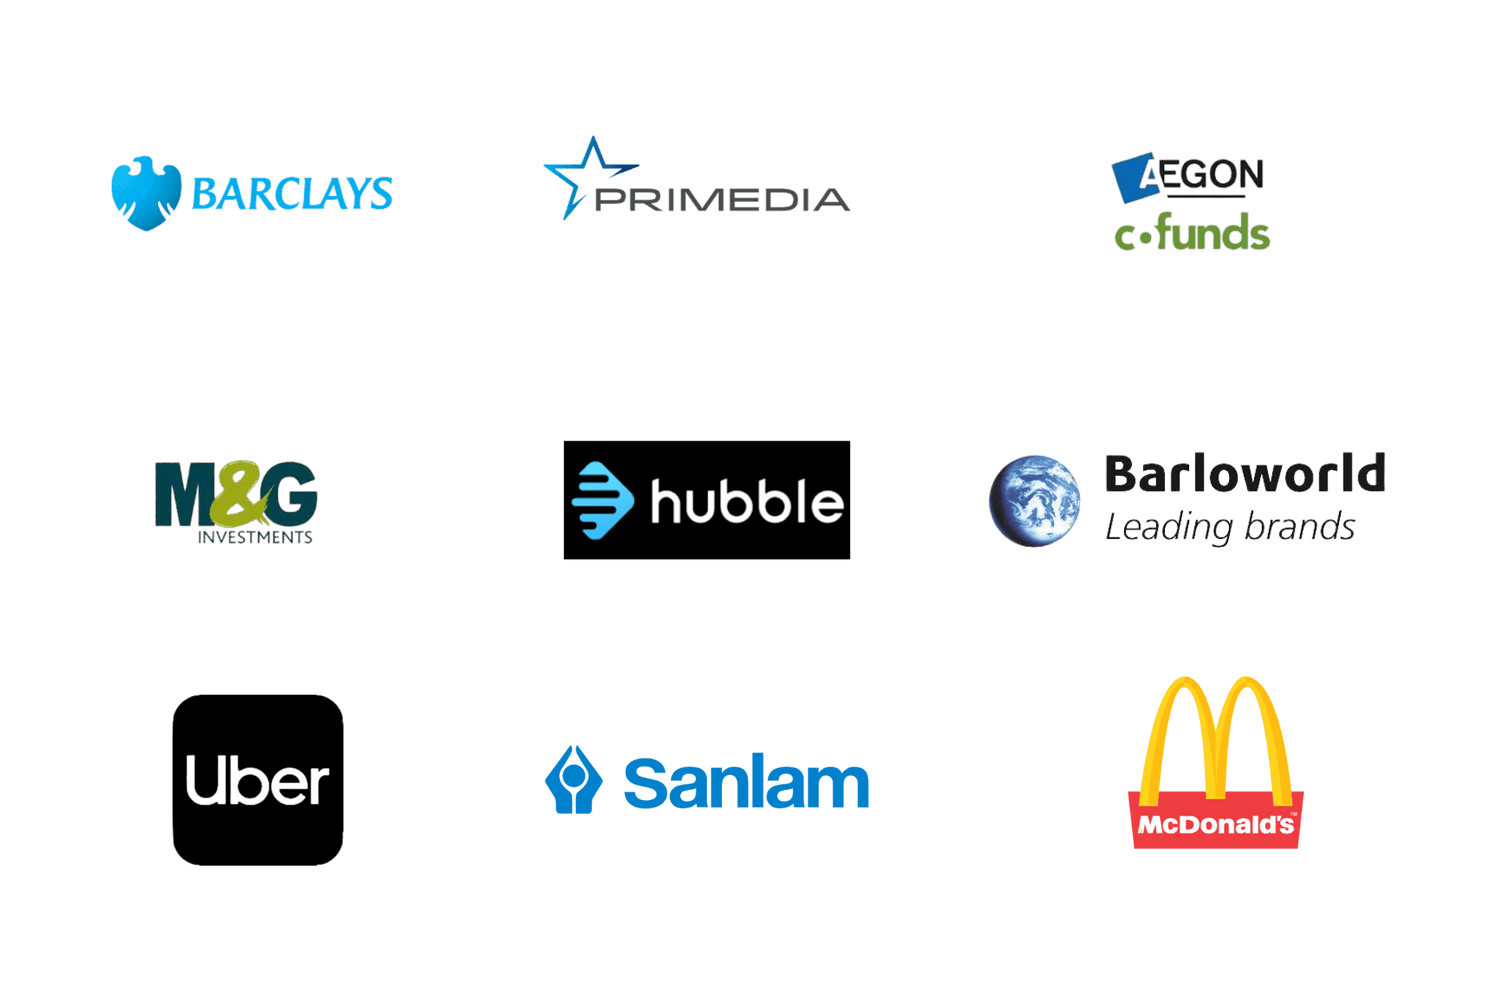 Some of companies helped in the past to optimise cash flow: M&G (UK); Barclays Global Investment Bank (UK); CoFunds (UK); Transnet (SA); Uber (Europe and South Africa); Hubble (SA; McDonalds (SA), Sanlam (SA); Primedia (SA).